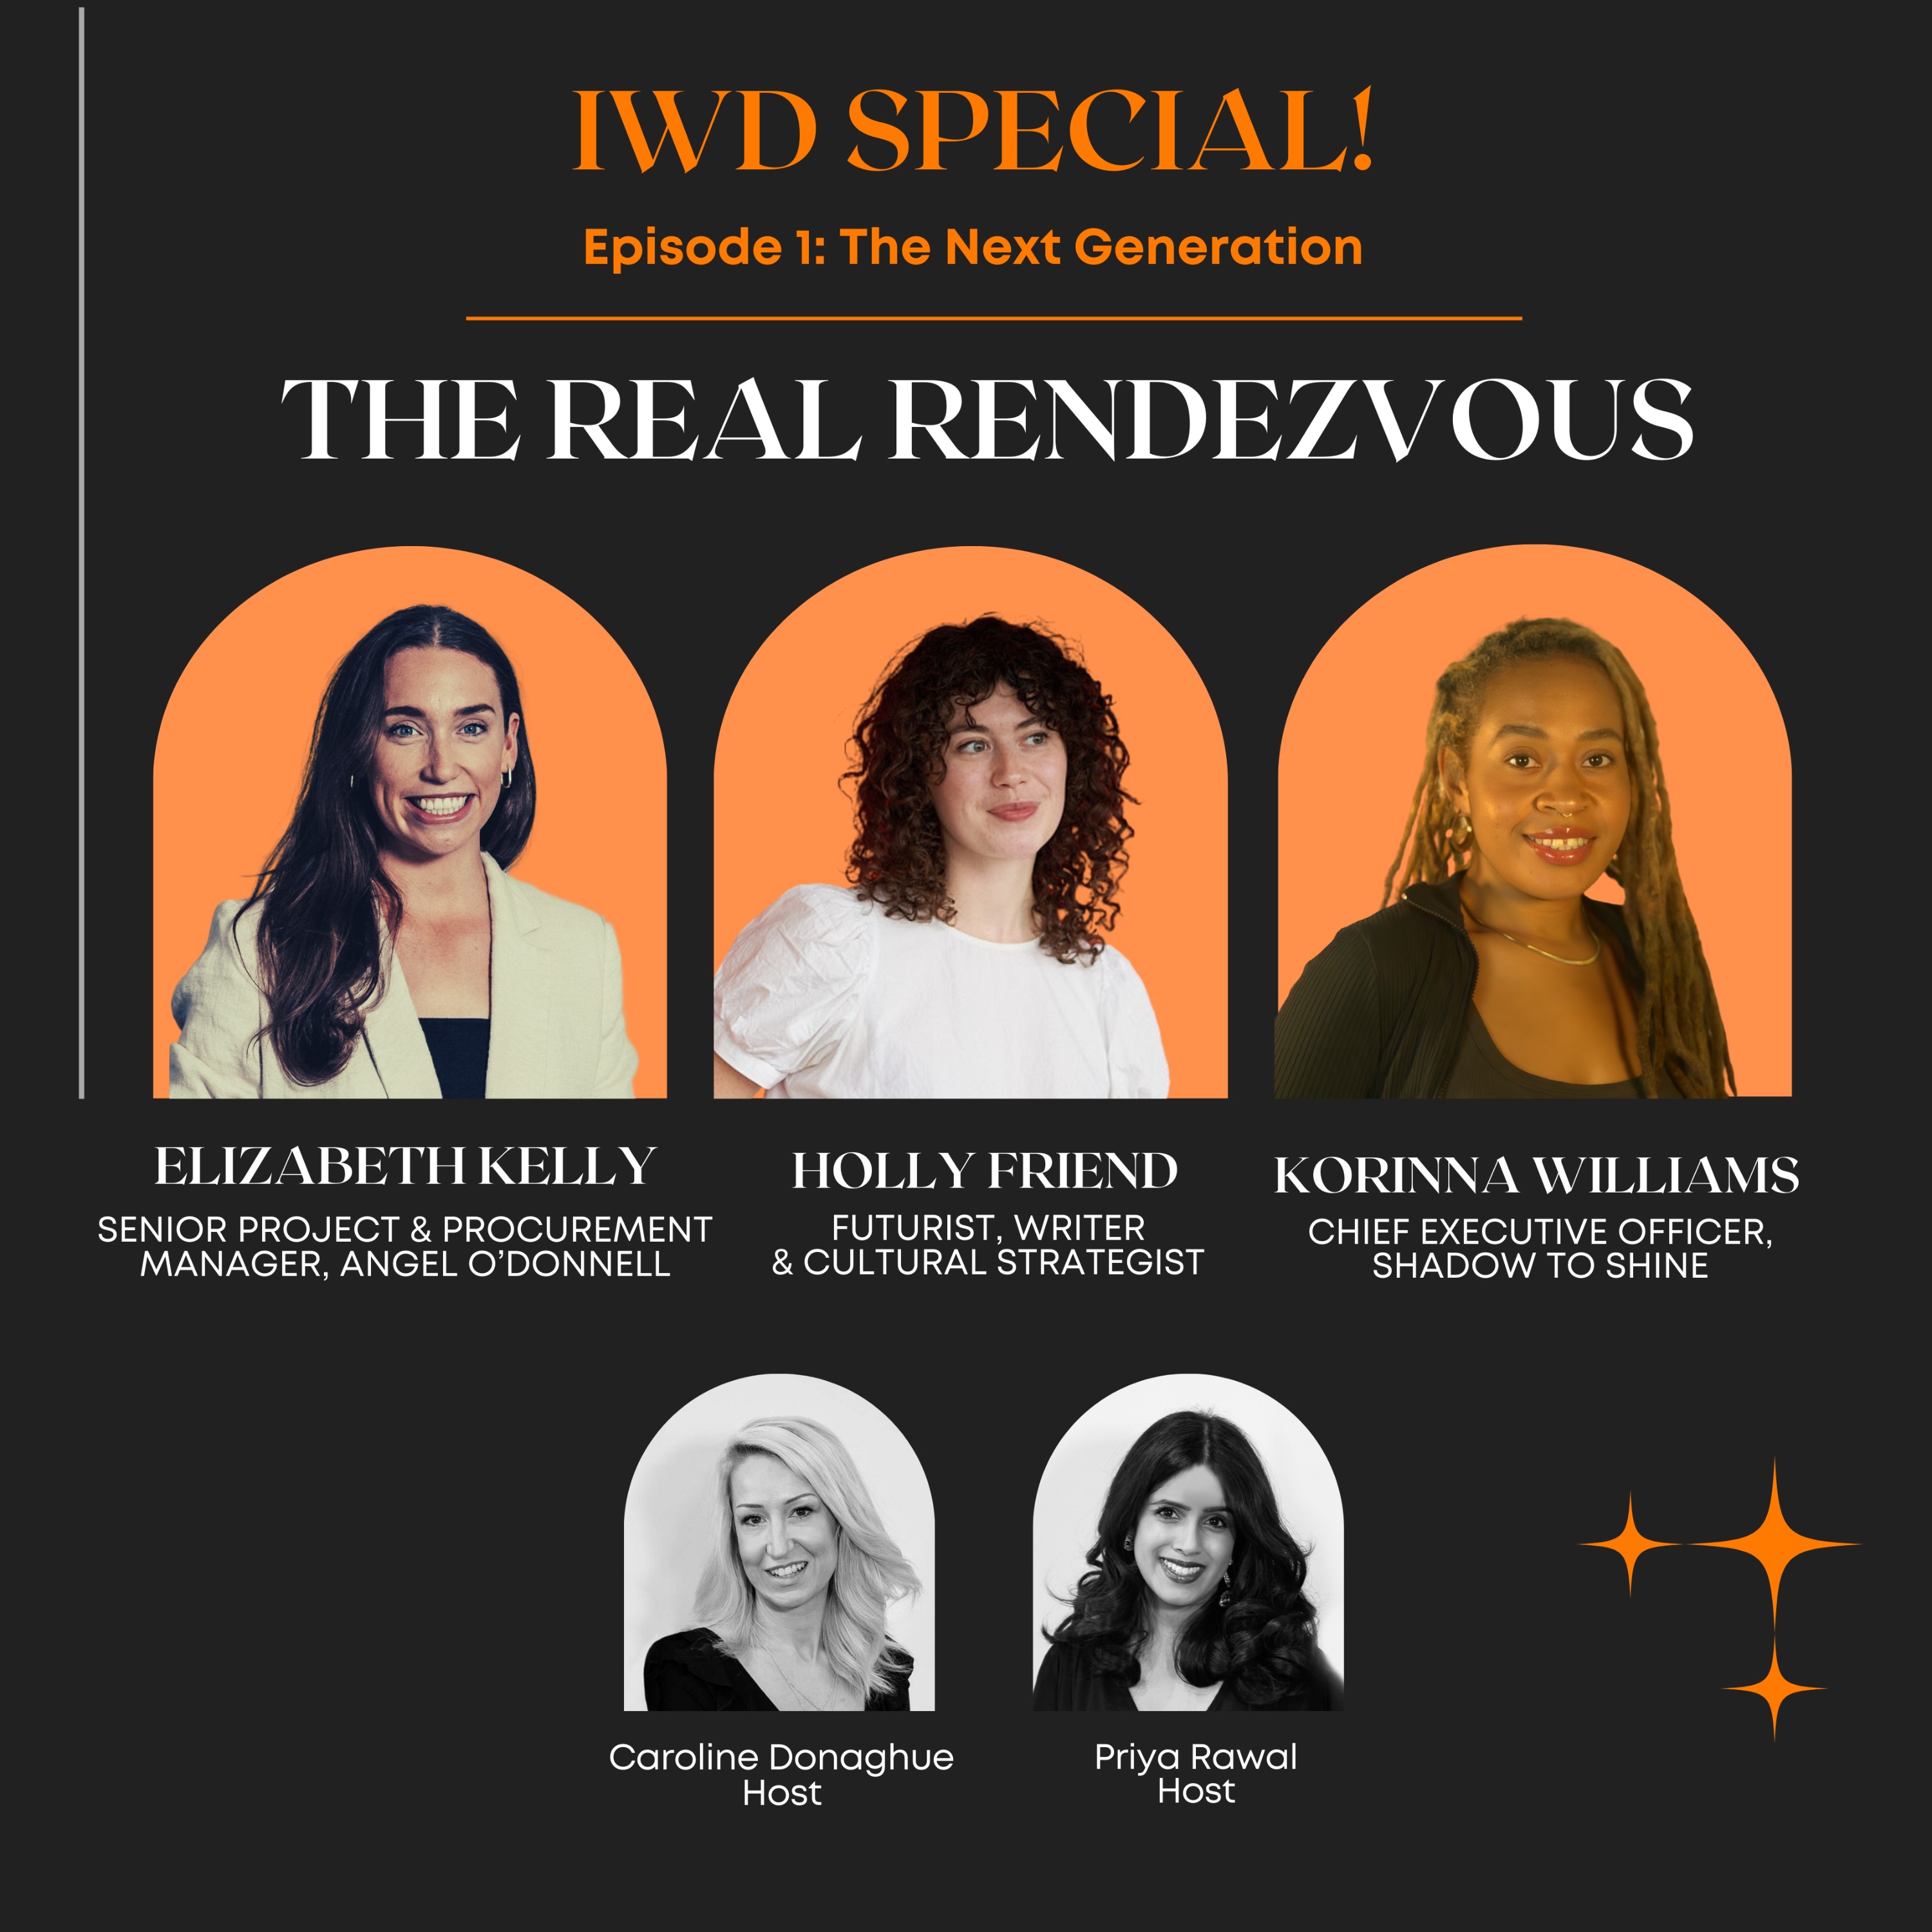 cover art for GENZ and The Next Generation - IWD special with Elizabeth Kelly, Holly Friend and Korinna Williams